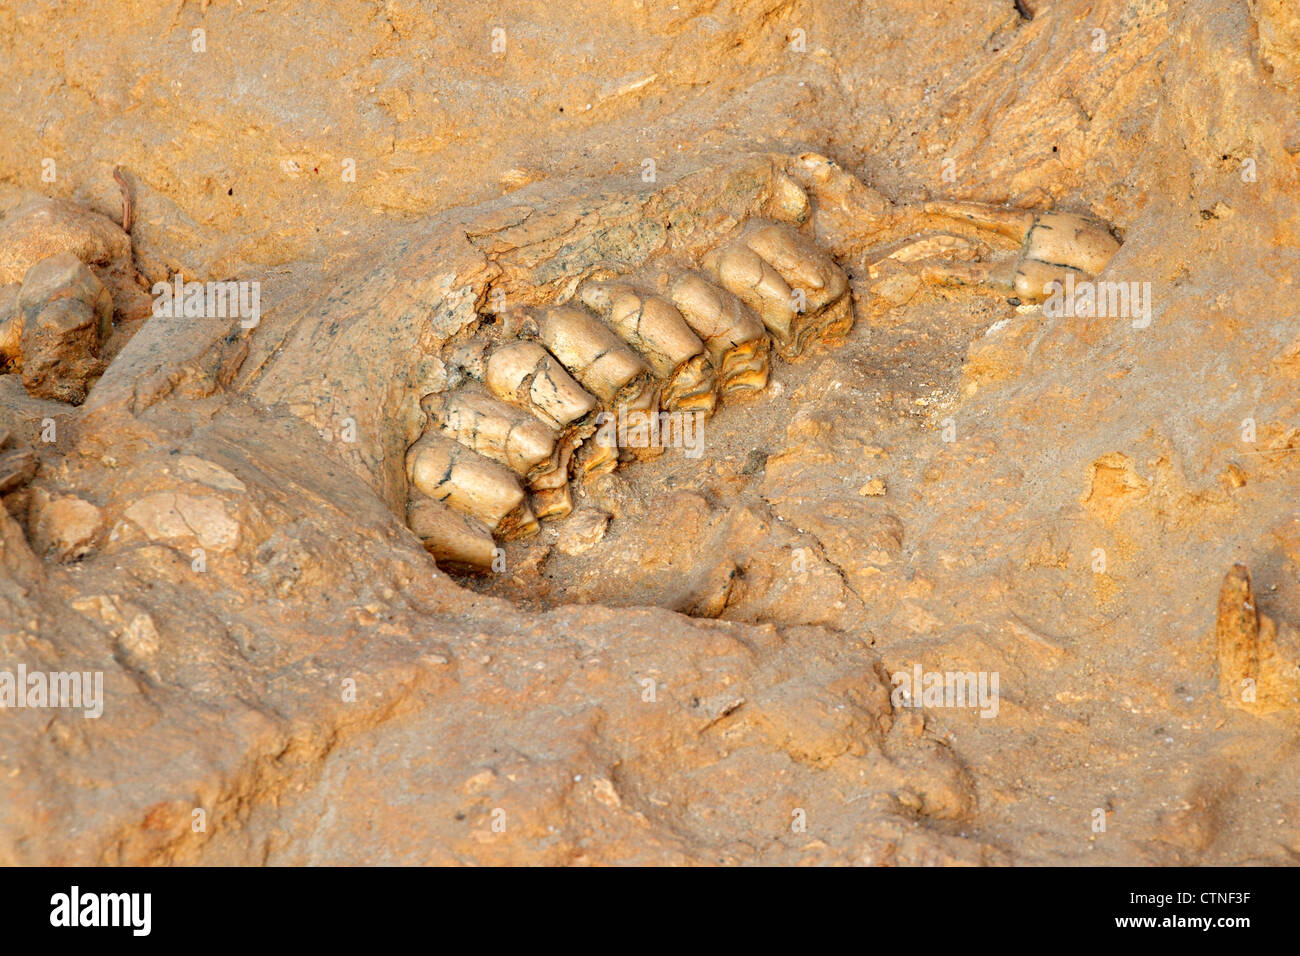 Five million year old fossil jaw bone of an extinct short-necked giraffe (Sivathere), West coast fossil park, South Africa Stock Photo